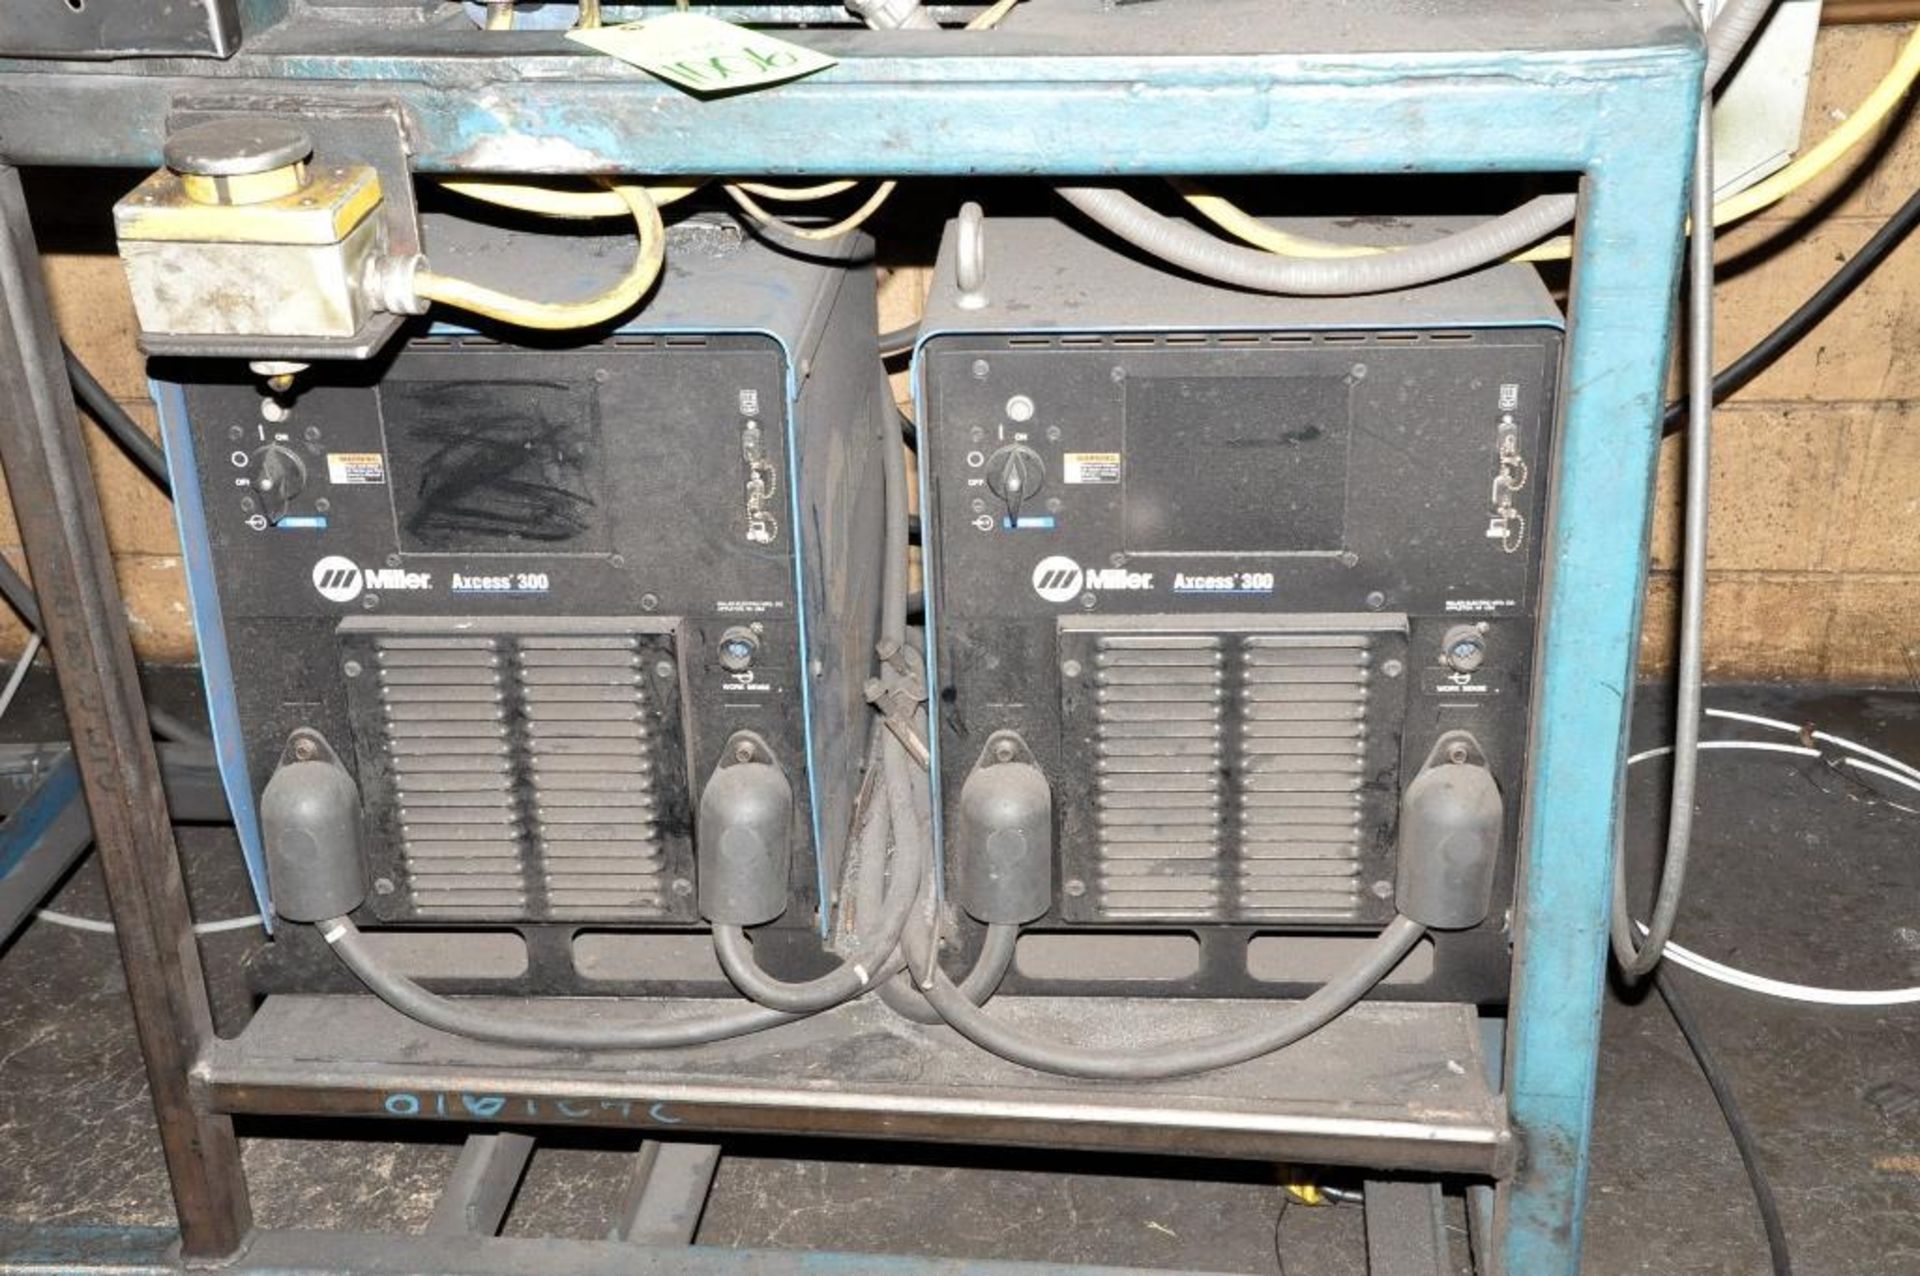 Lot-(2) Miller Axcess 300, 300-Amp Capacity Arc Welding Power - Image 2 of 4